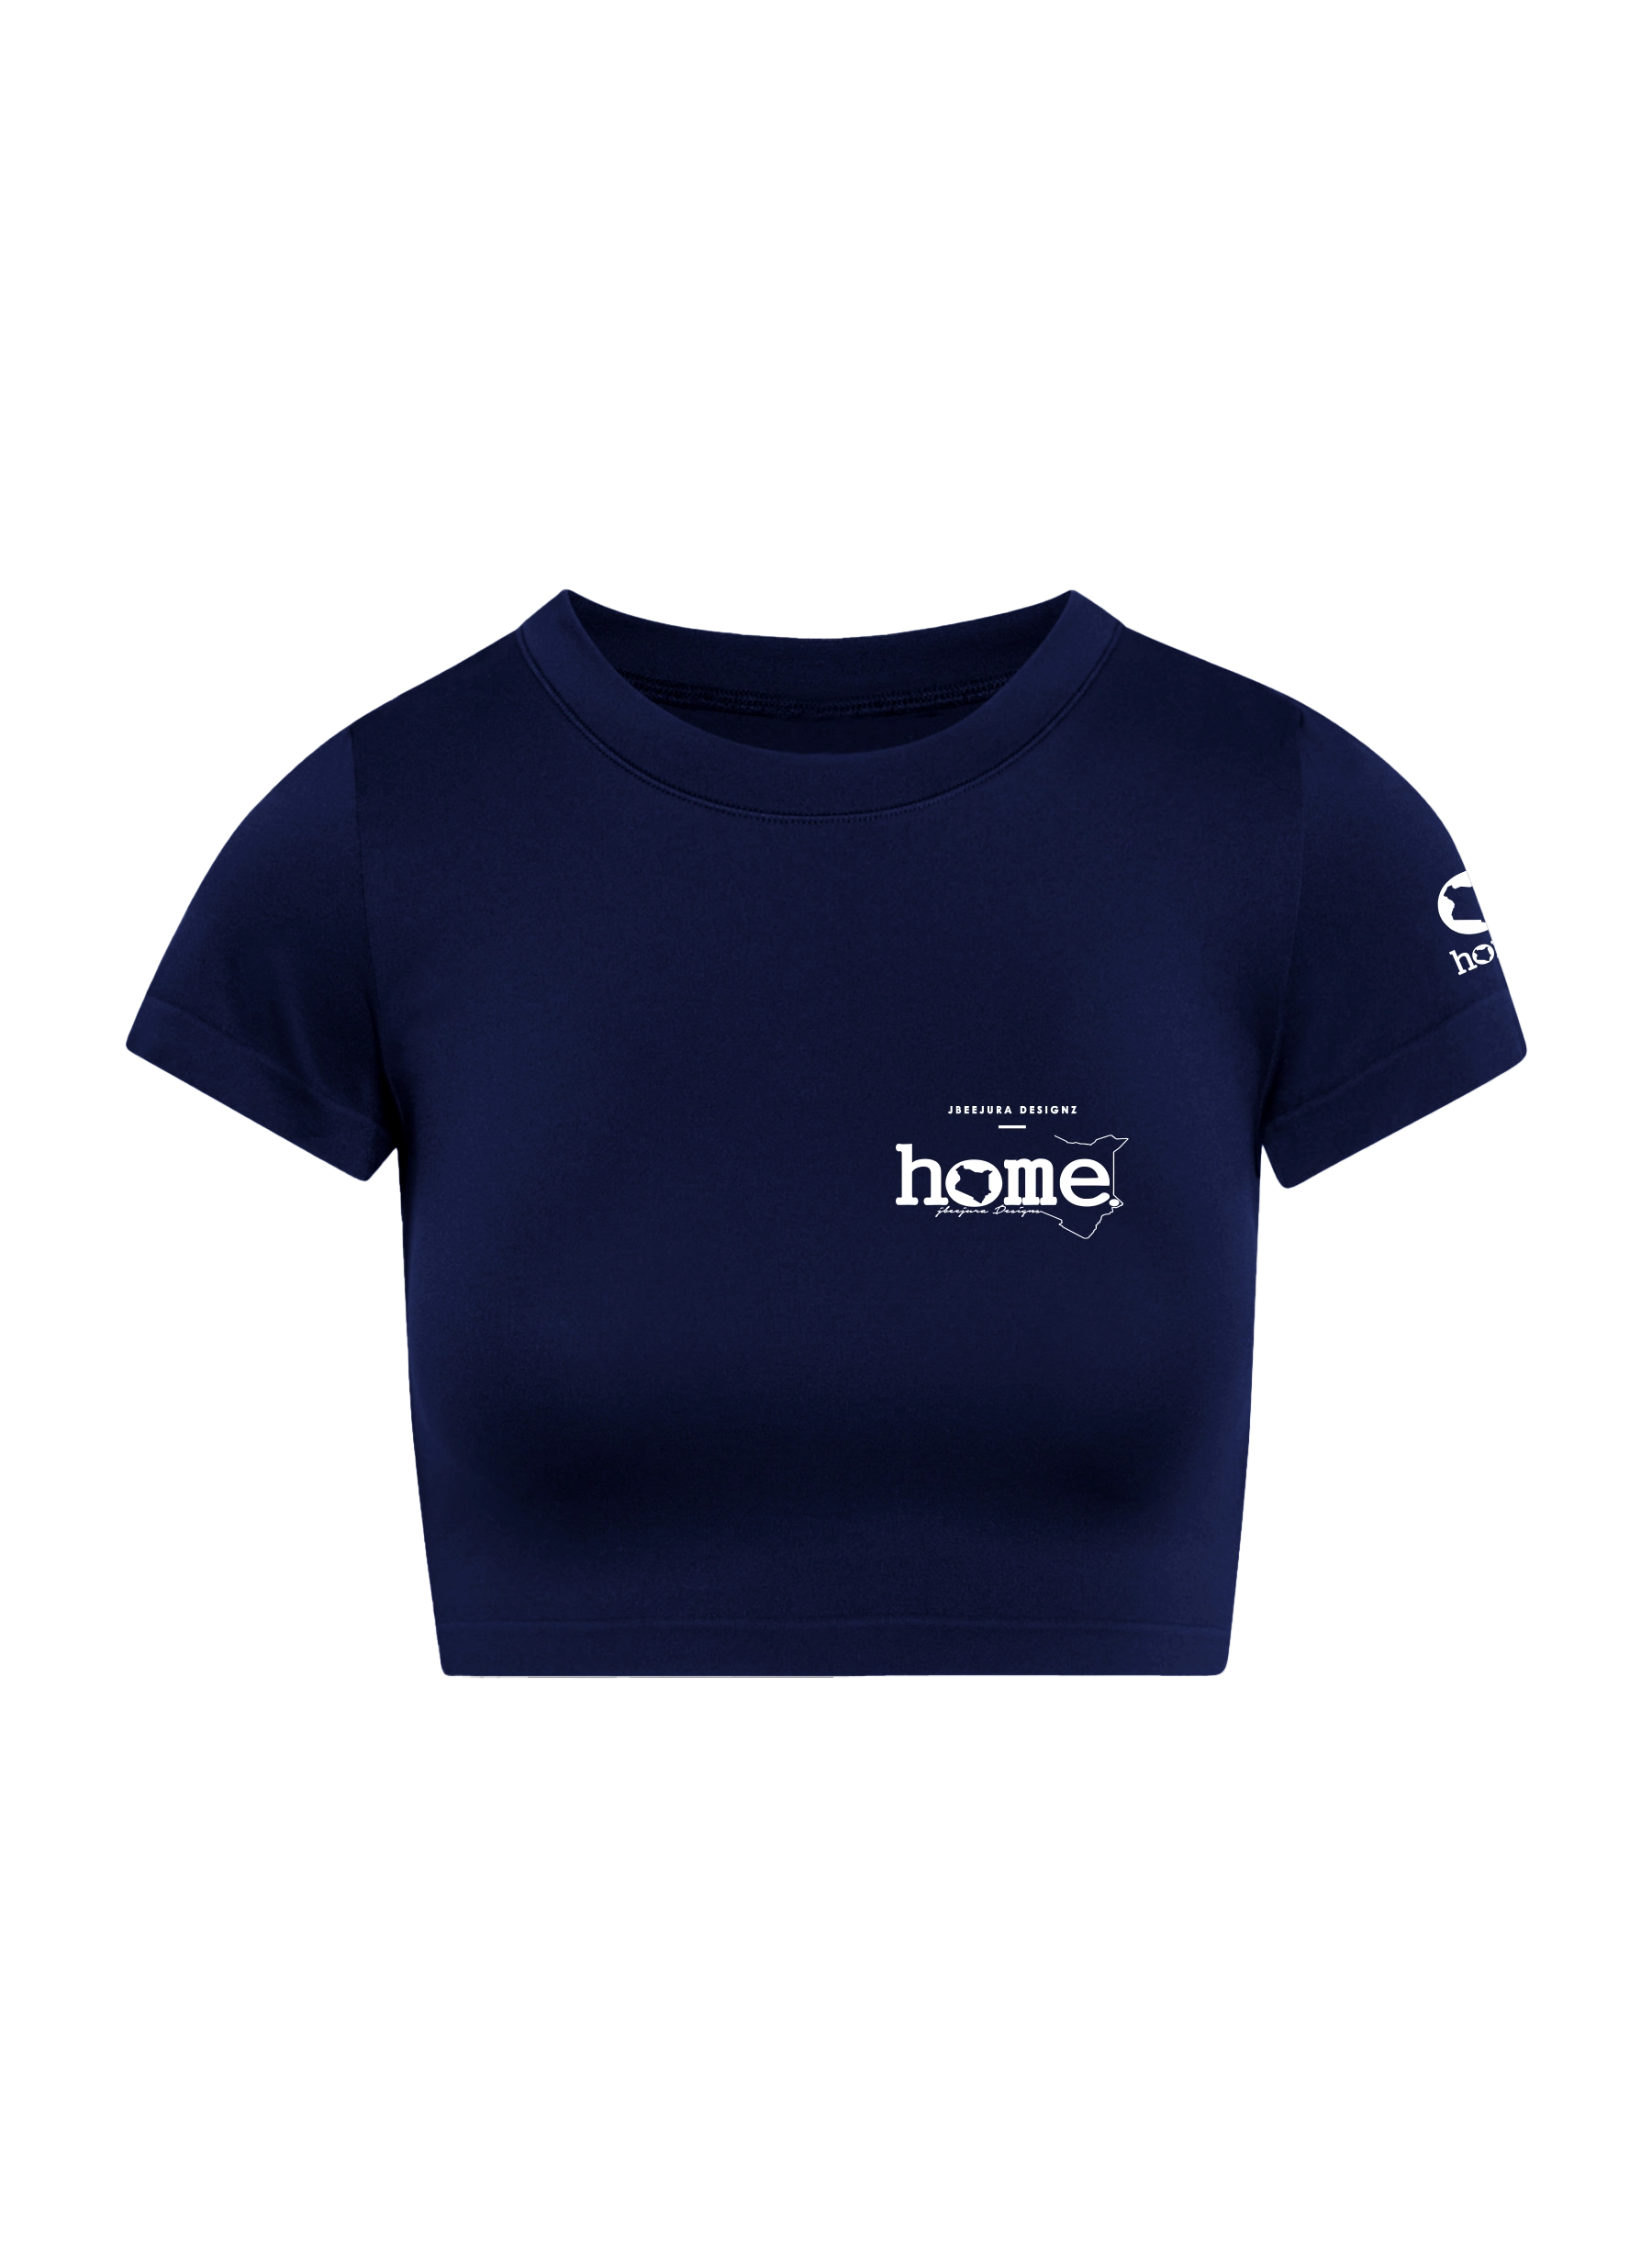 home_254 SHORT SLEEVED NAVY-BLUE CROPPED ARIA TEE WITH A WHITE 3D WORDS PRINT 